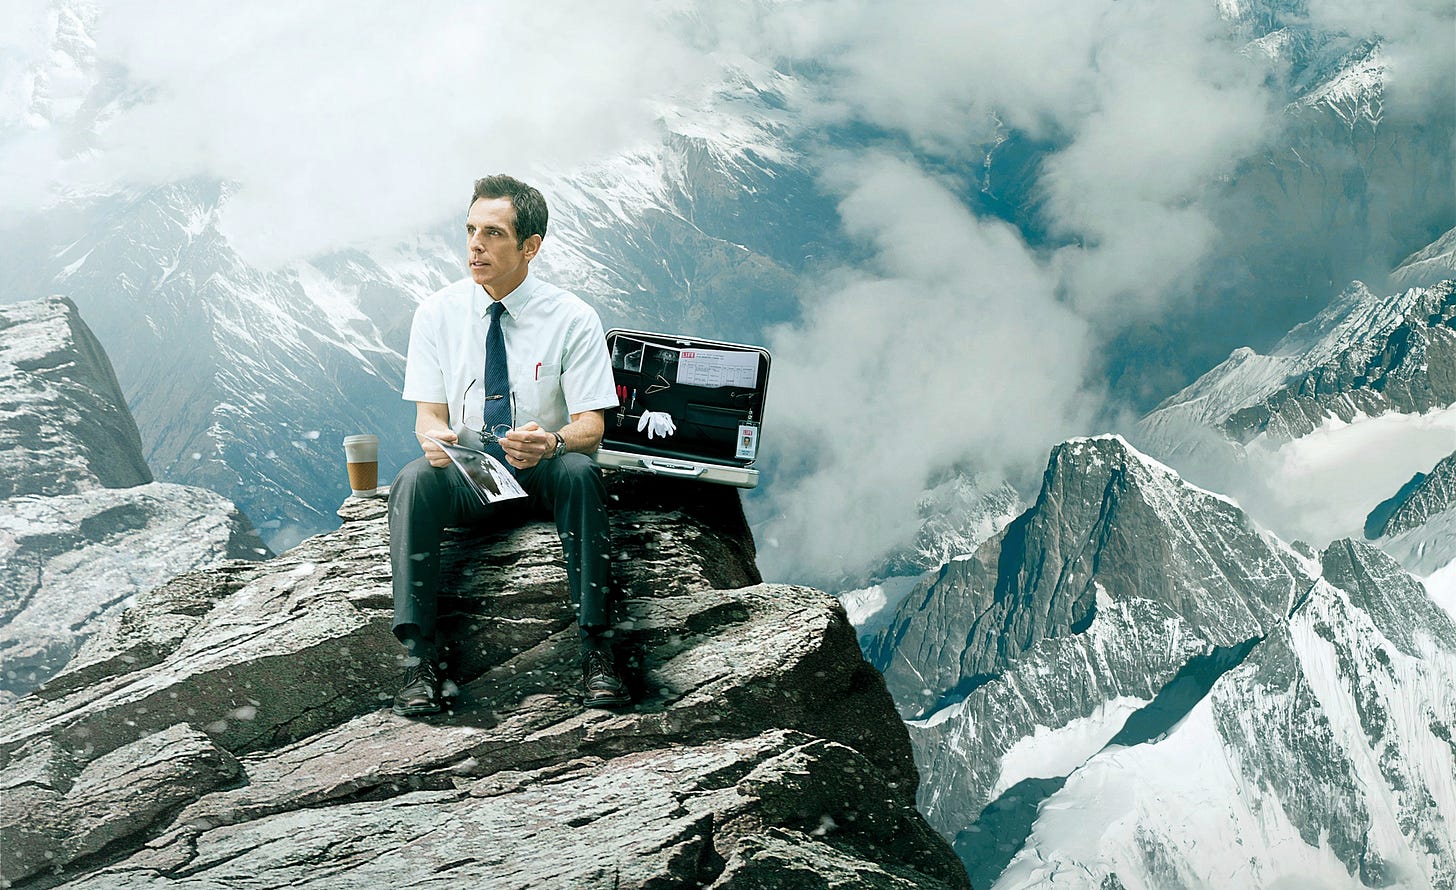 From The Secret Life Of Walter Mitty